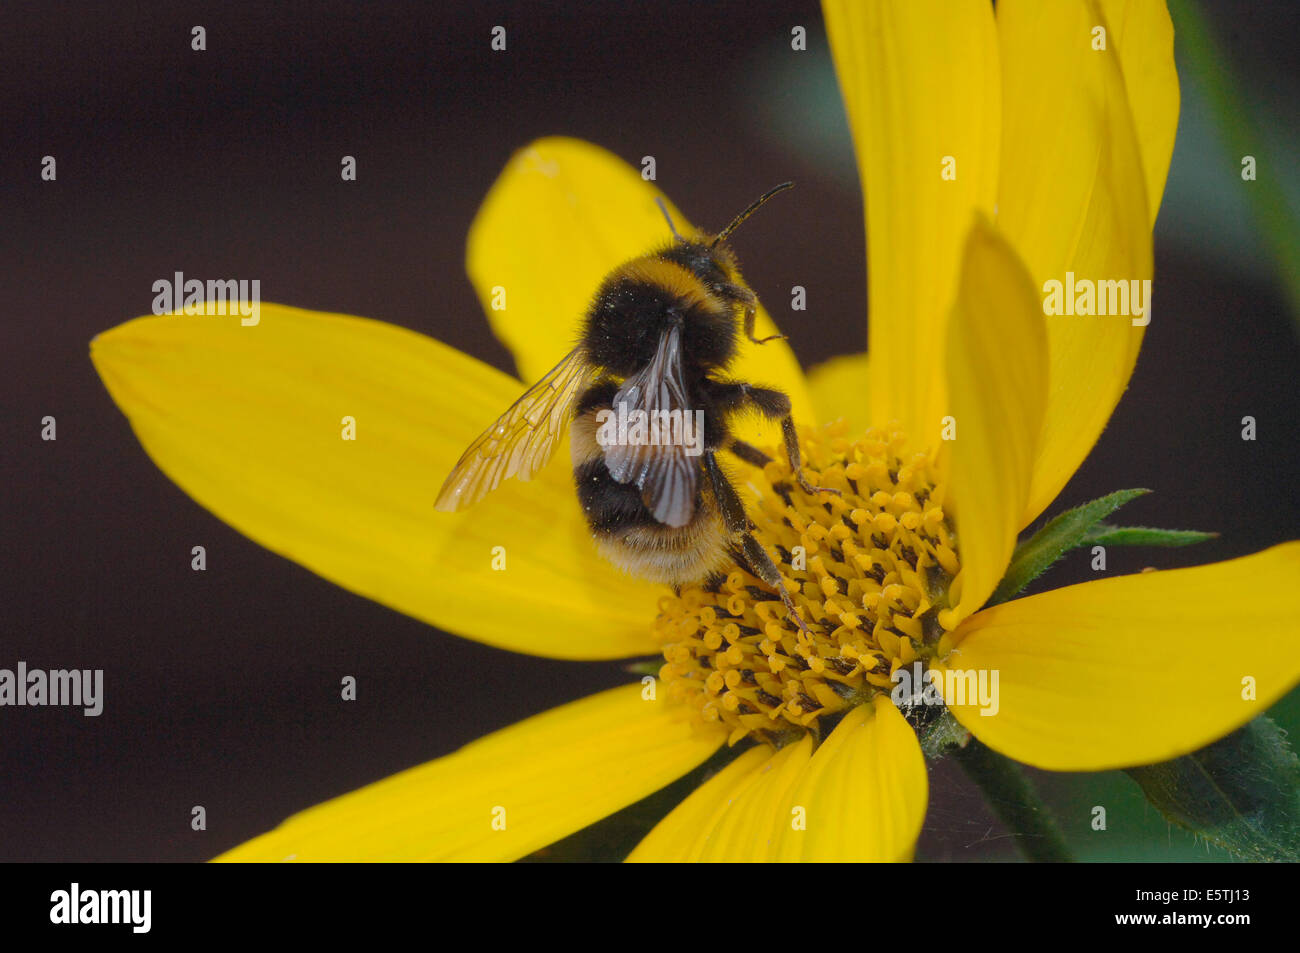 A Buff-Tailed Bumble Bee On A Yellow Daisy Flower.(Bombus terrestris). Stock Photo